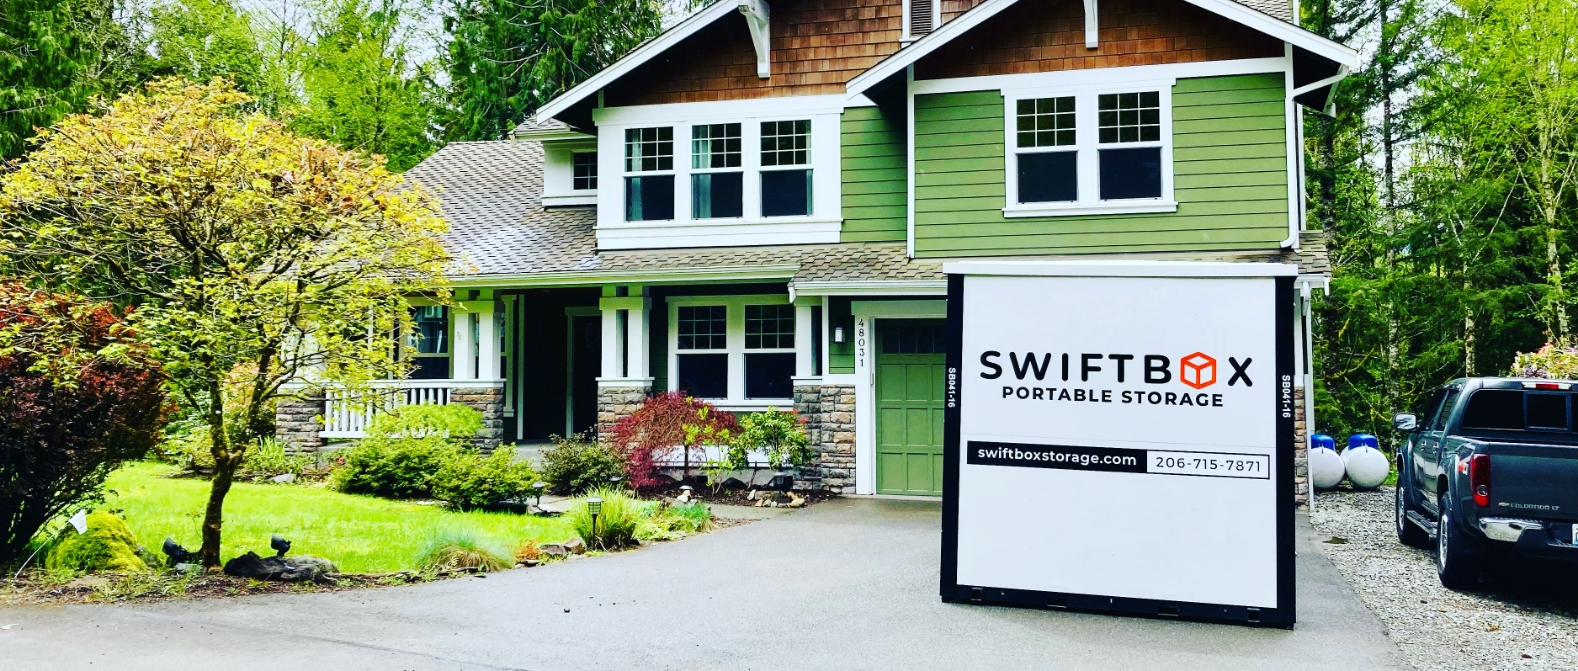 Residential Moving, Swiftbox's mobile storage unit in Puget sound, Washington.